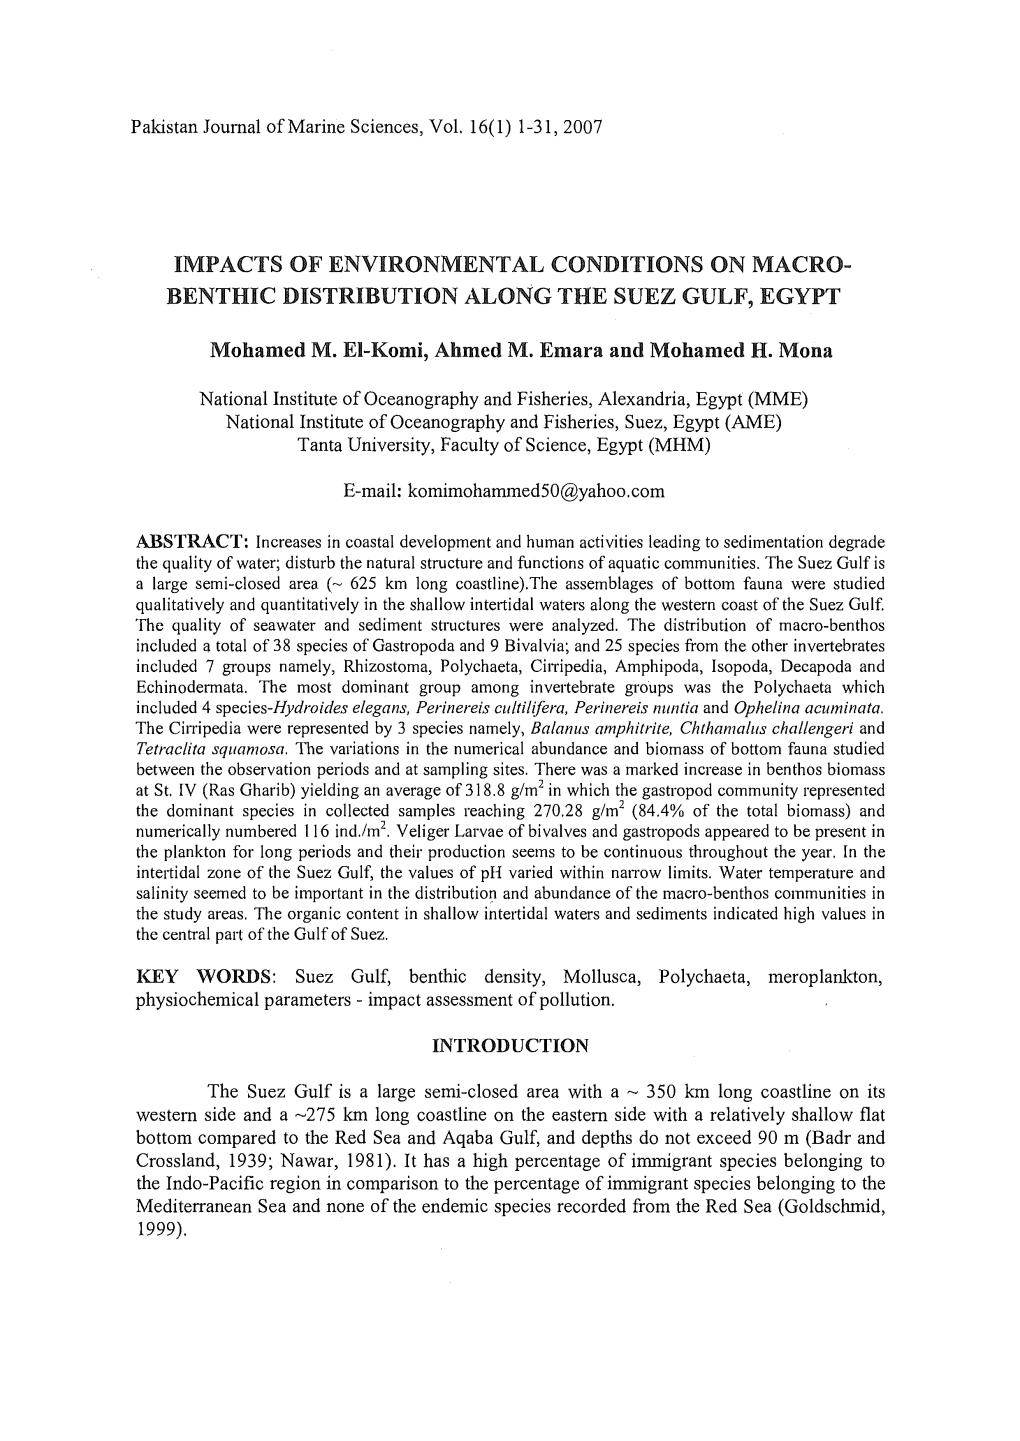 Impacts of Environmental Conditions on Macro-Benthic Distribution Along